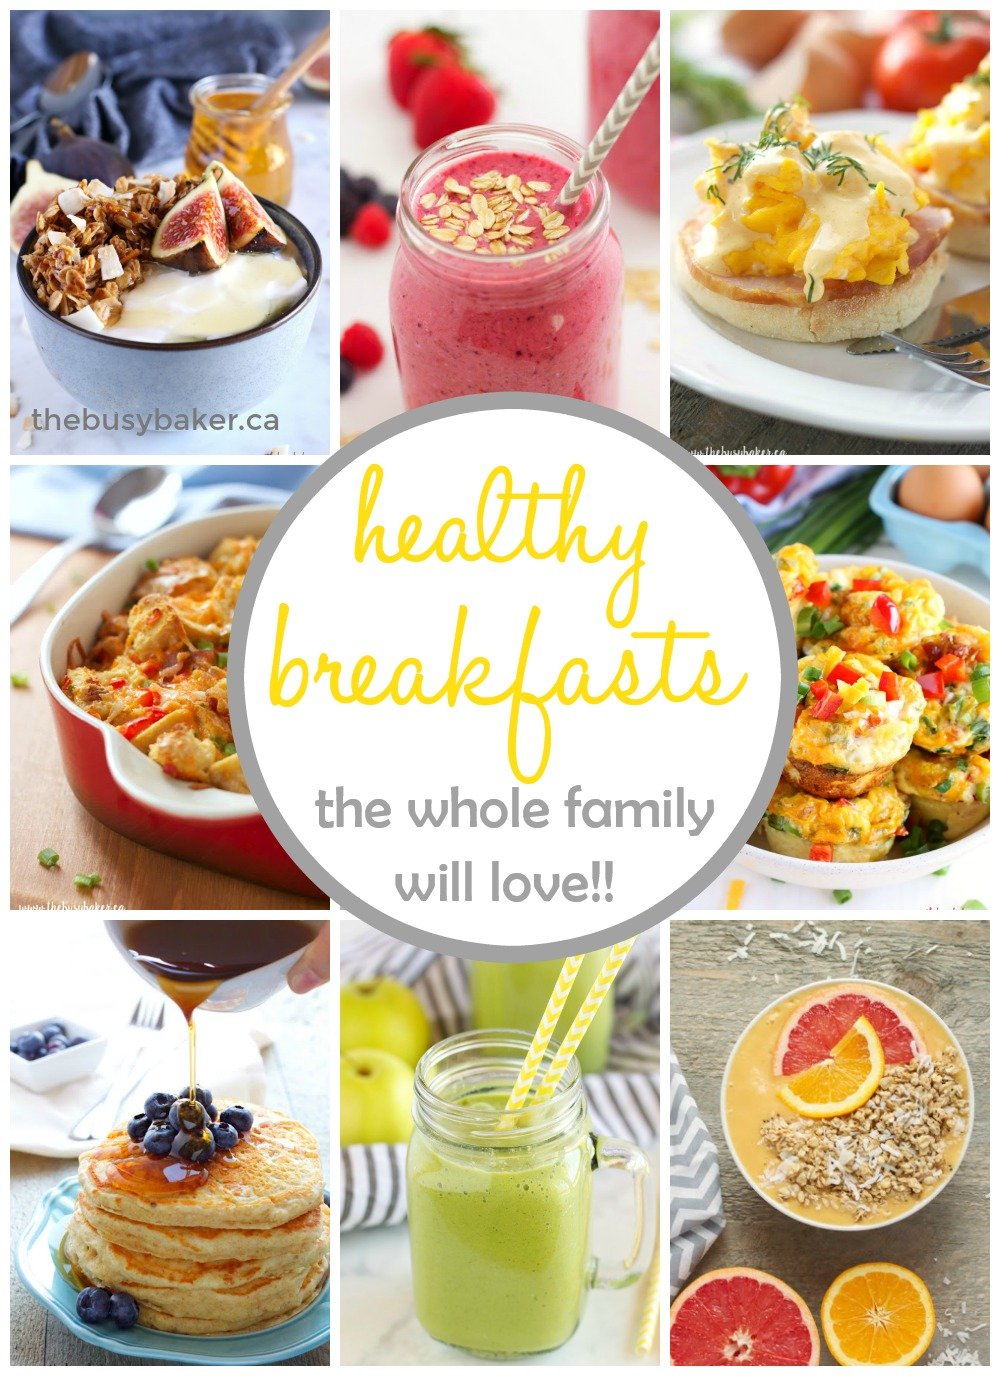 Healthy Breakfast Recipes the Whole Family Will Love! - The Busy Baker